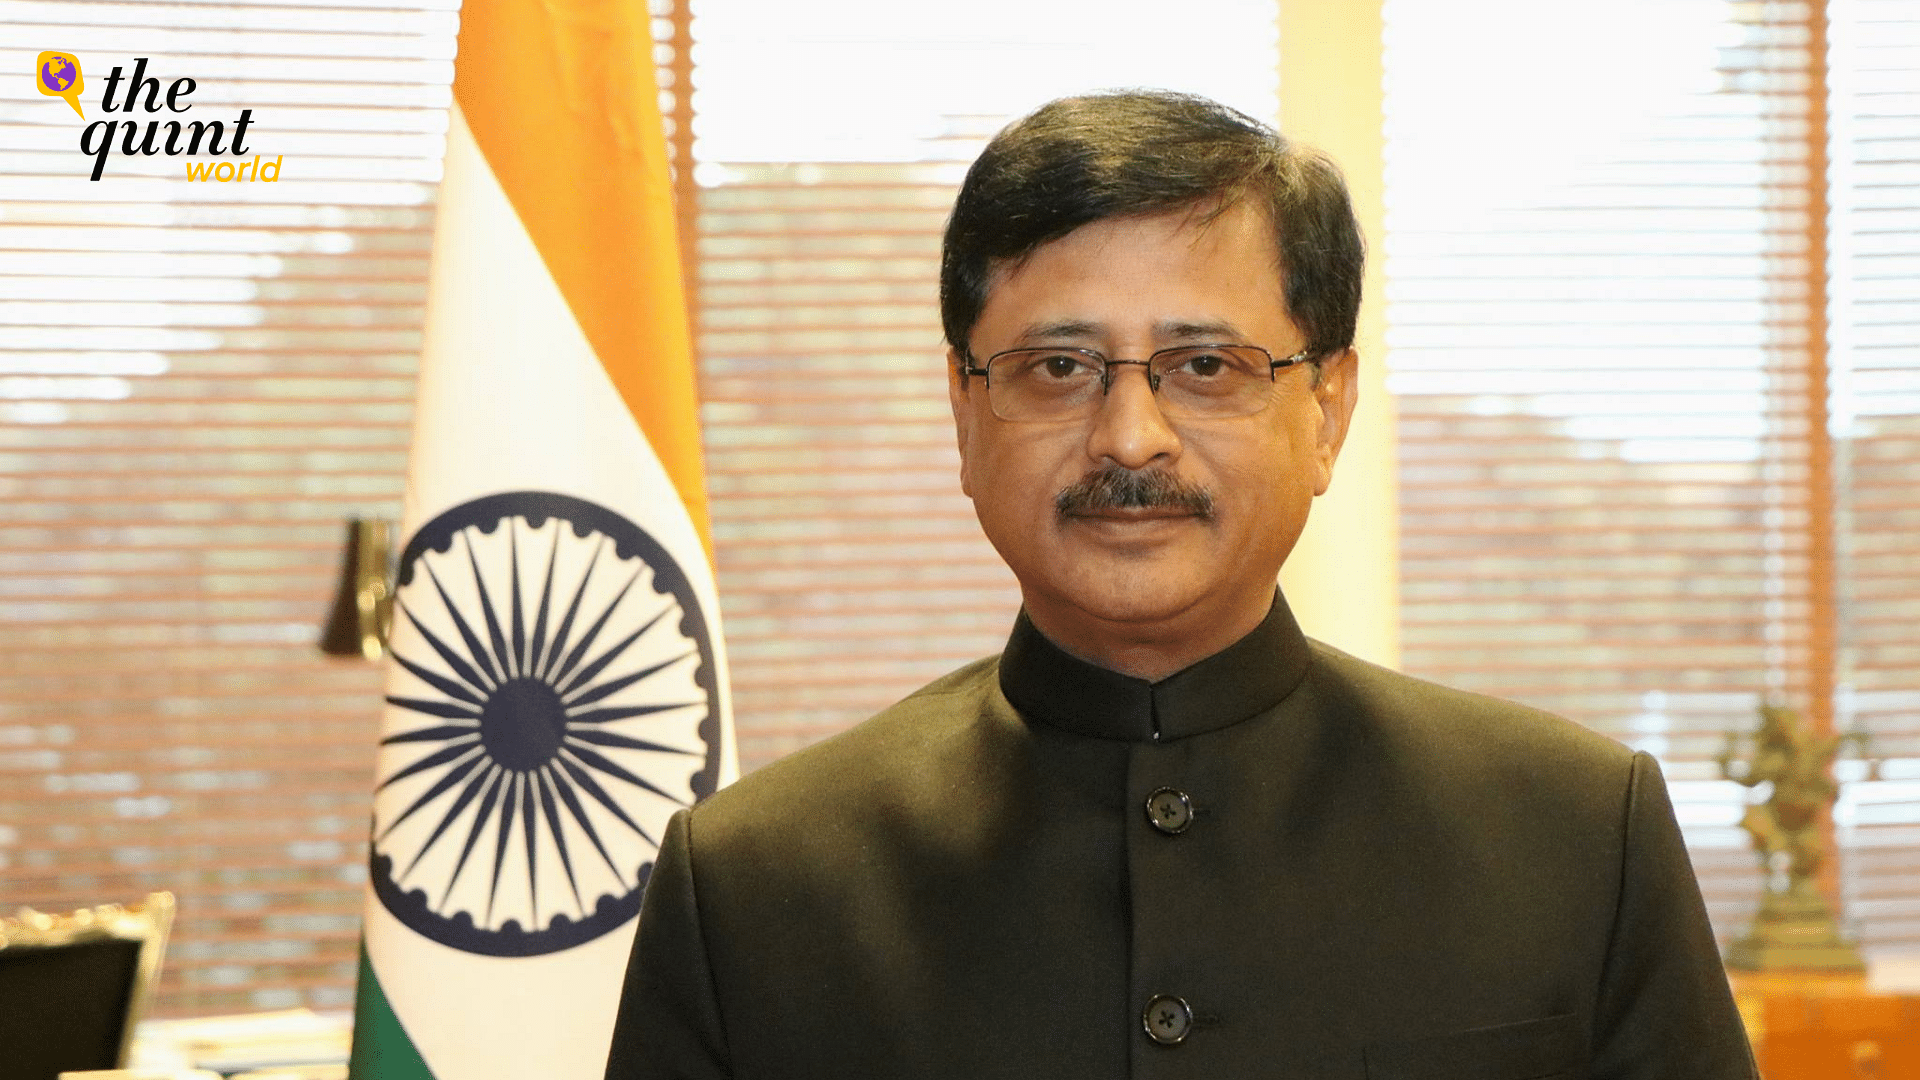 <div class="paragraphs"><p>While Verma said that India-US ties are outside his jurisdiction, he indicated that Indian officials are actively collaborating with the US and have been shown “inputs which are legally presentable."</p></div>